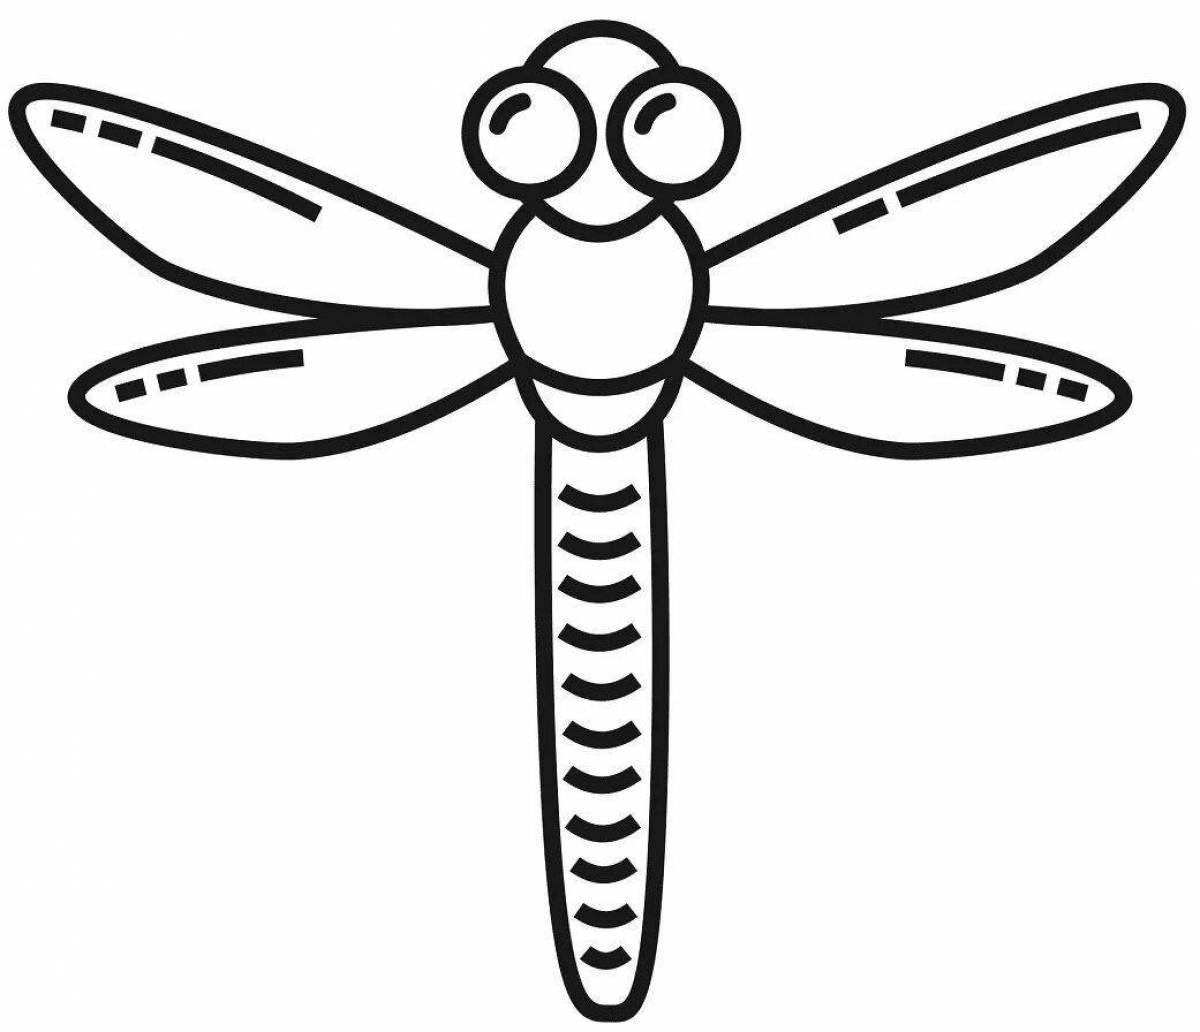 Dragonfly for kids #1